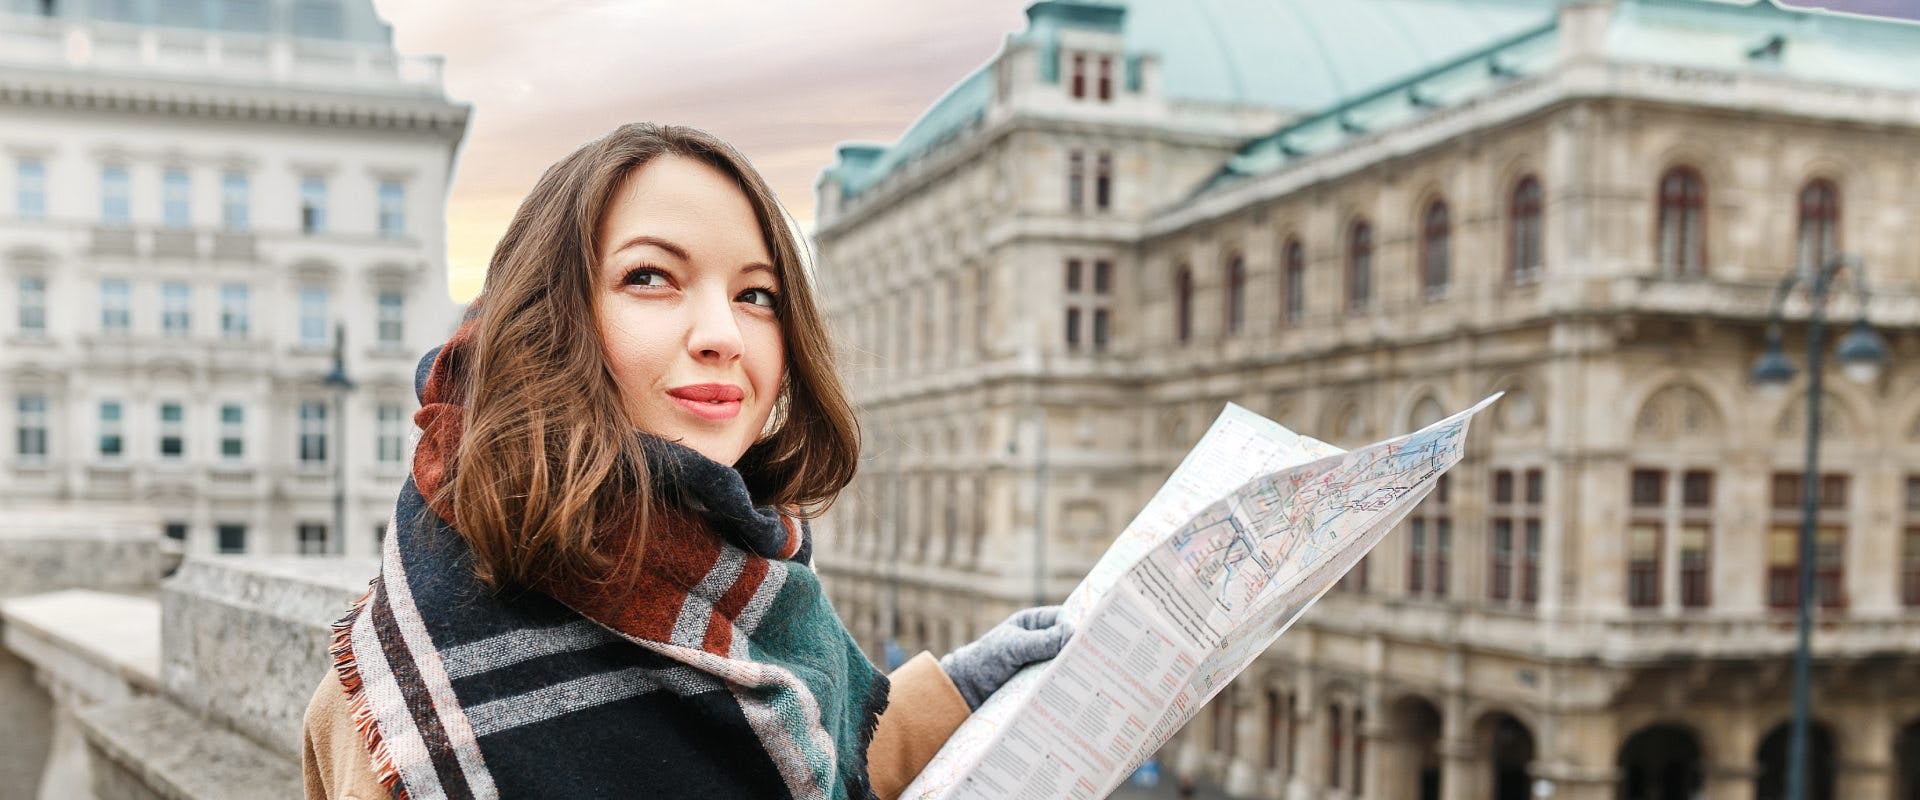 A solo female traveler in Vienna looking at a map.